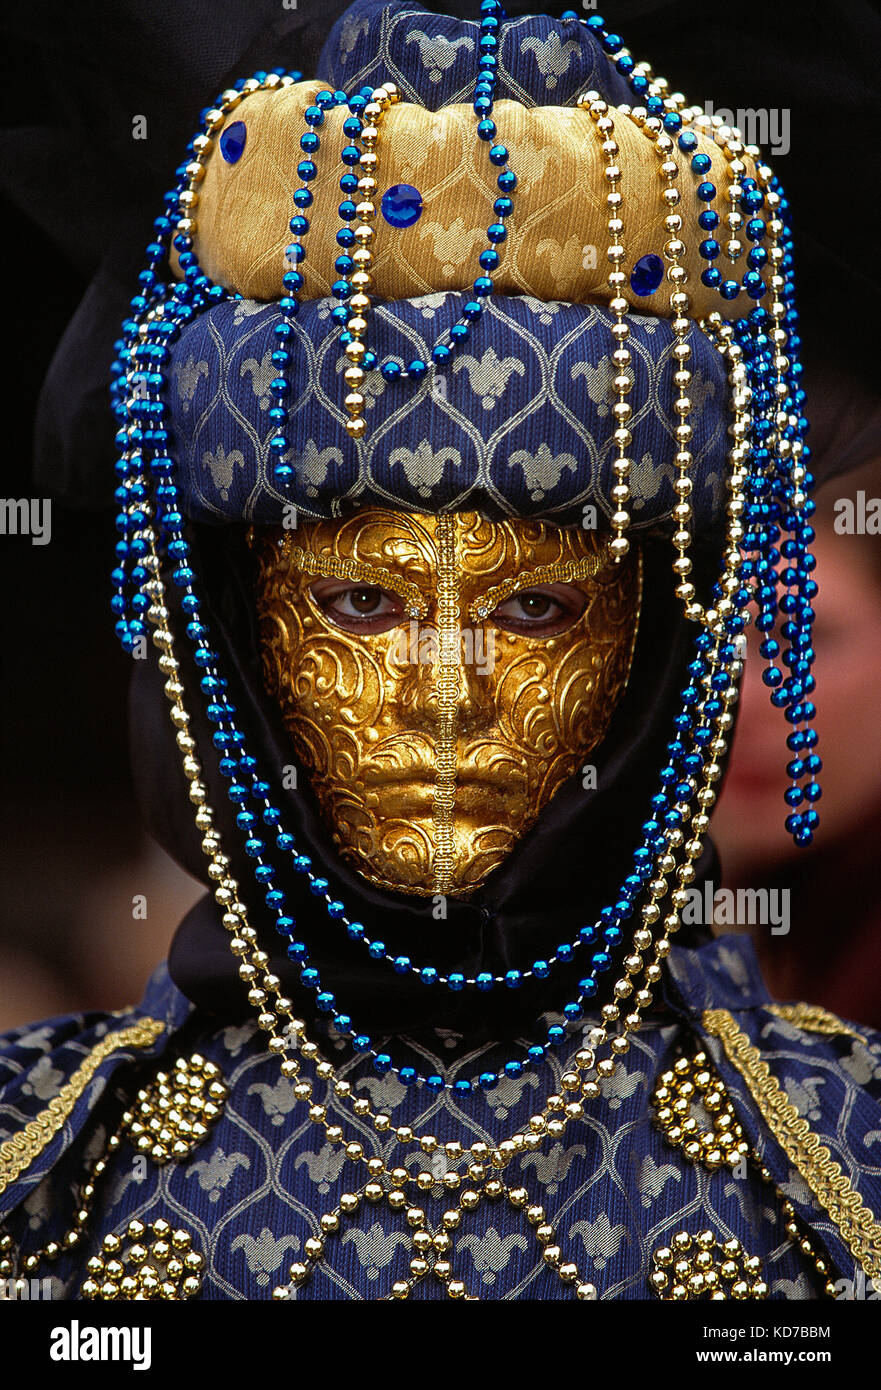 Italy. Venice. Carnival. Woman in costume. Close up of face with gold & mask. Stock Photo